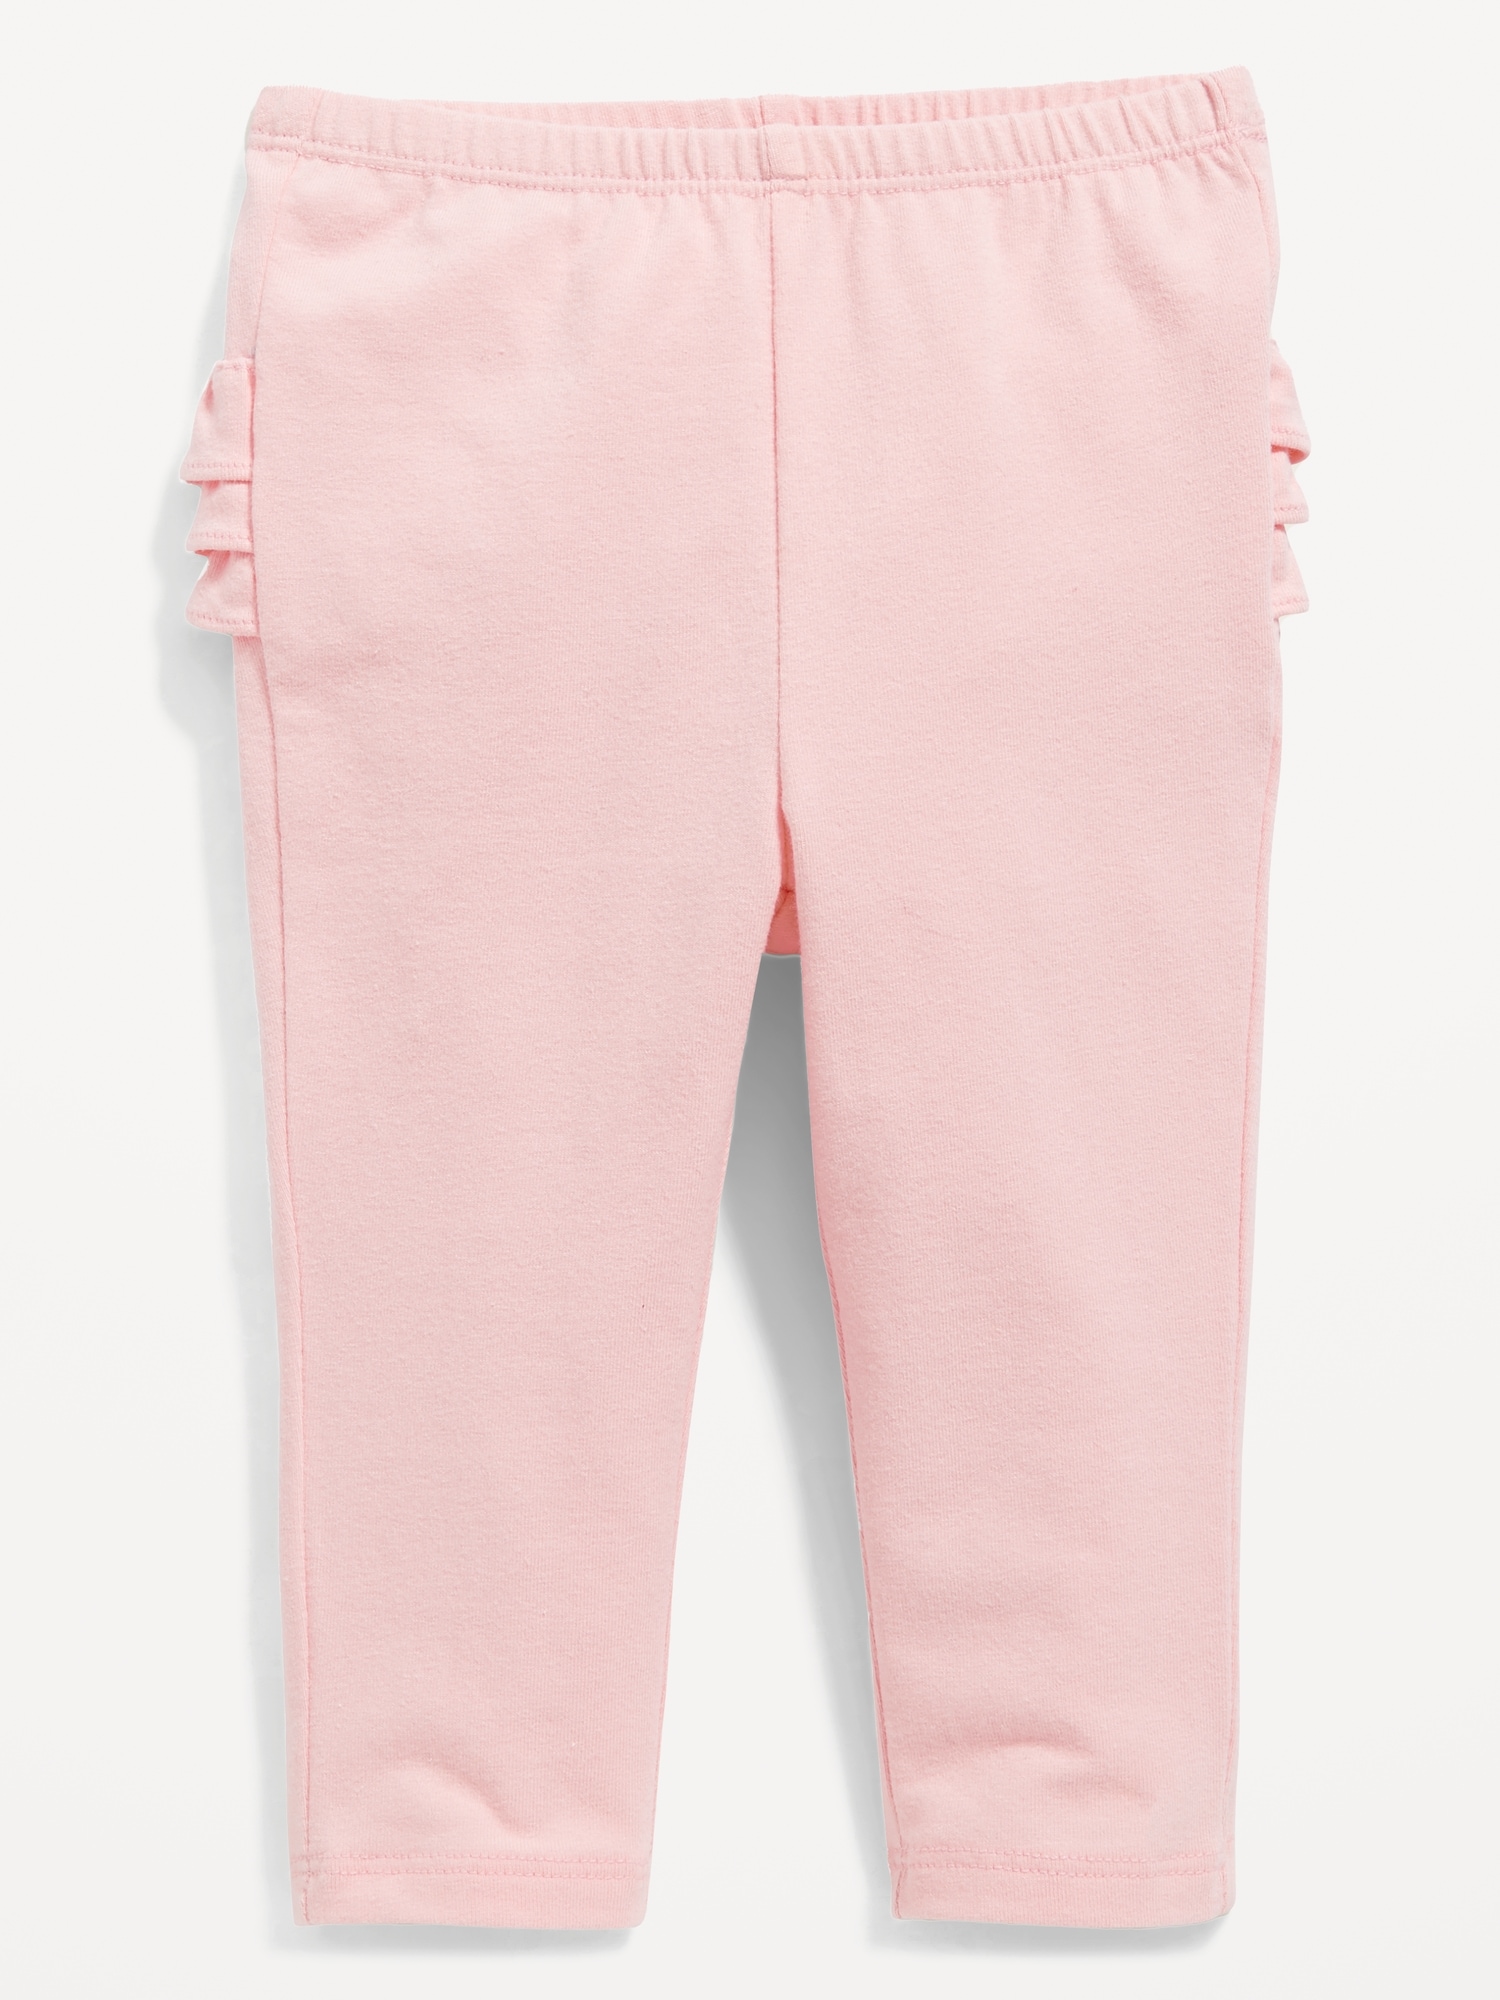 RESERVED-Pink Ruffle tightss  Kids outfits, Toddler wearing, Ruffle  leggings